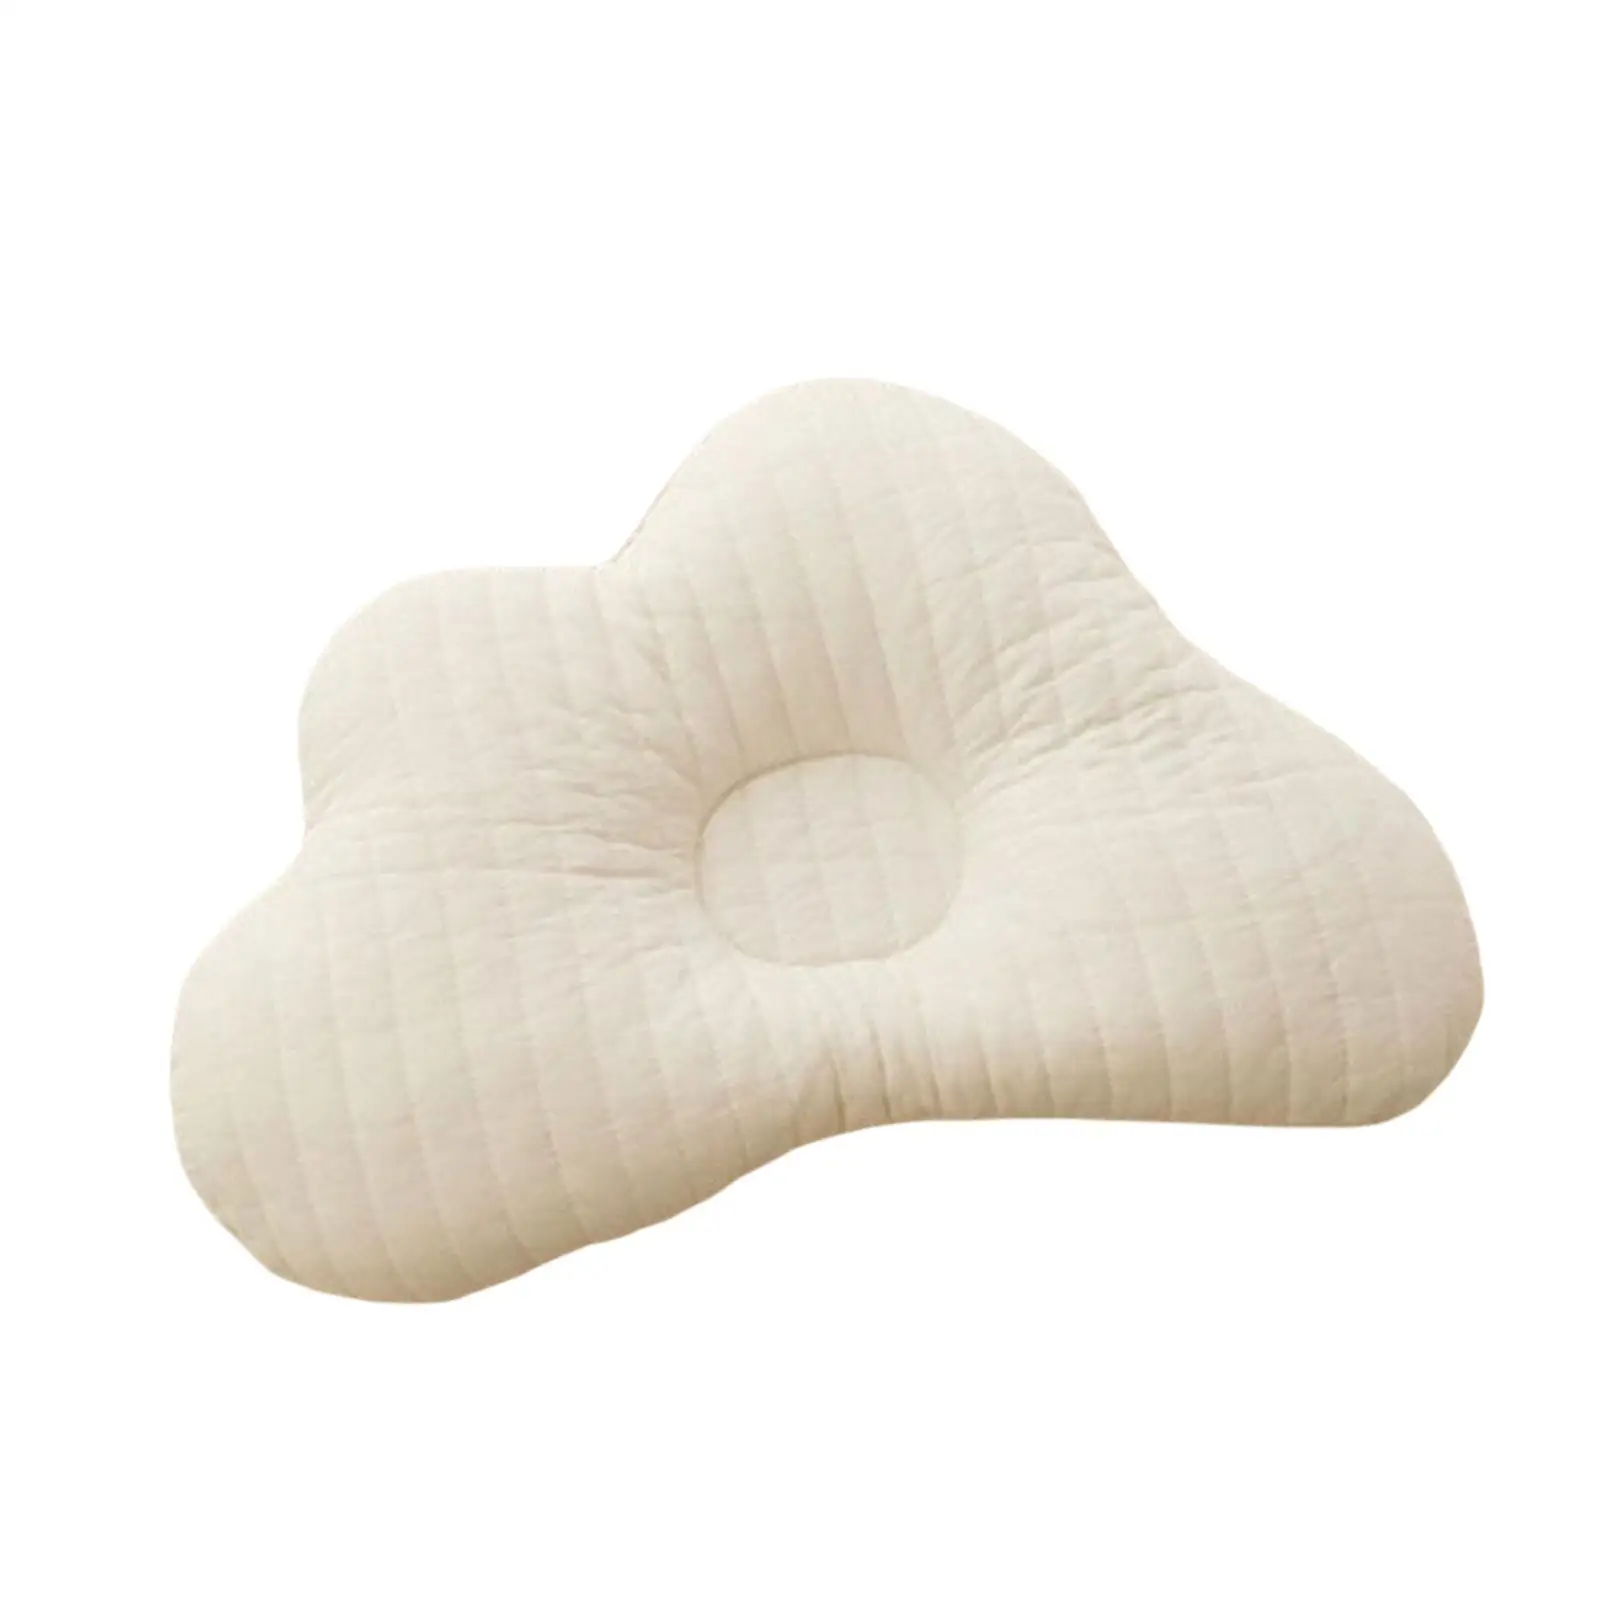 Multifunctional Portable Newborn Pillows Breathable Toddler pillow